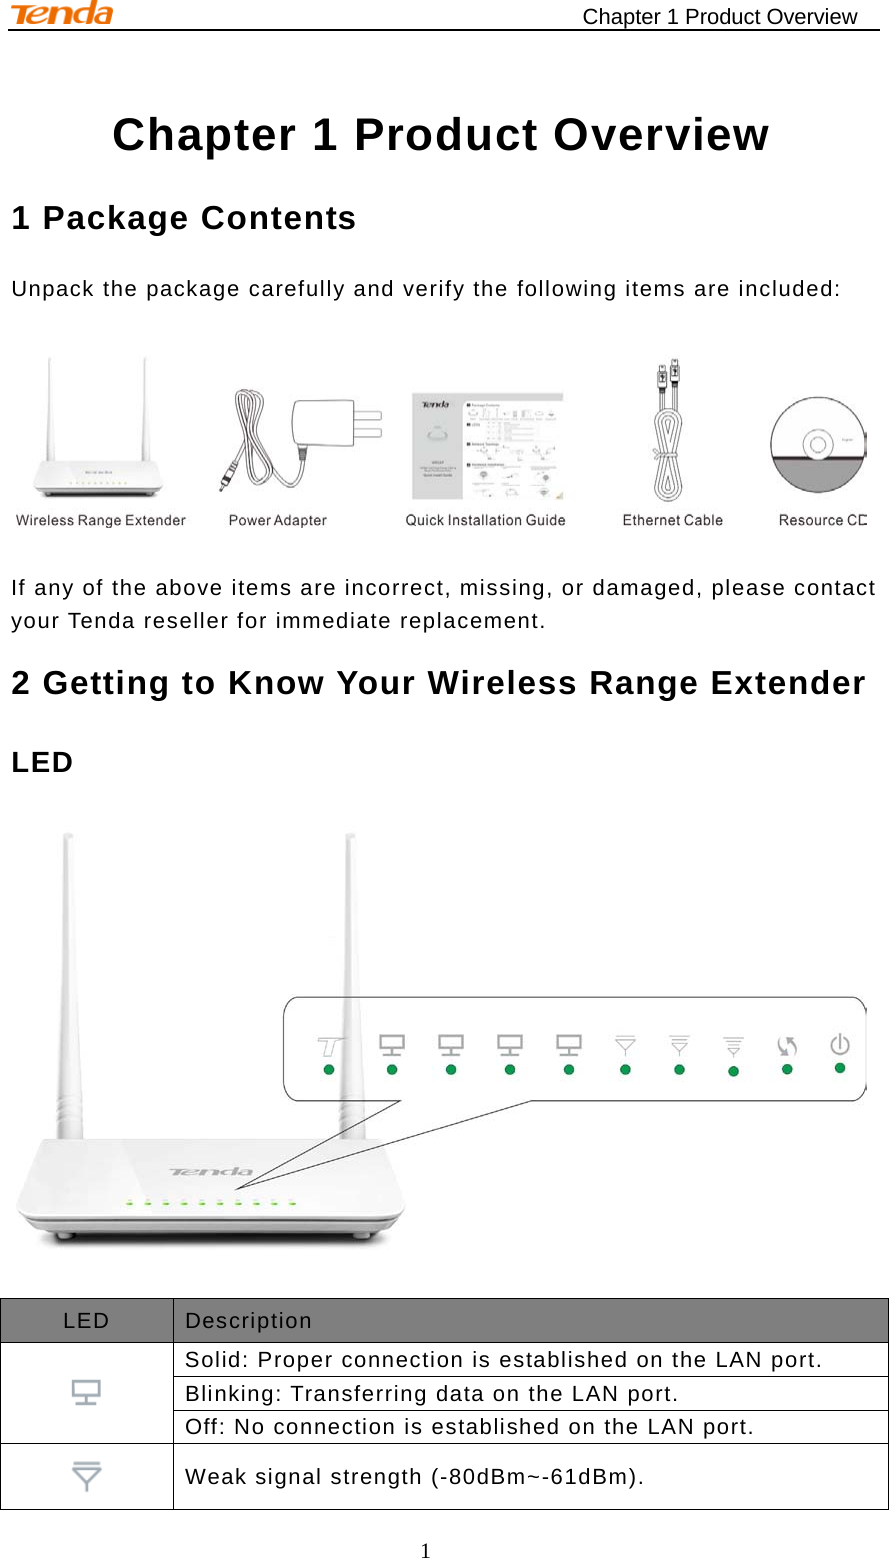                                            Chapter 1 Product Overview 1 Chapter 1 Product Overview 1 Package Contents Unpack the package carefully and verify the following items are included:    If any of the above items are incorrect, missing, or damaged, please contact your Tenda reseller for immediate replacement. 2 Getting to Know Your Wireless Range Extender LED   LED Description  Solid: Proper connection is established on the LAN port. Blinking: Transferring data on the LAN port. Off: No connection is established on the LAN port.  Weak signal strength (-80dBm~-61dBm). 